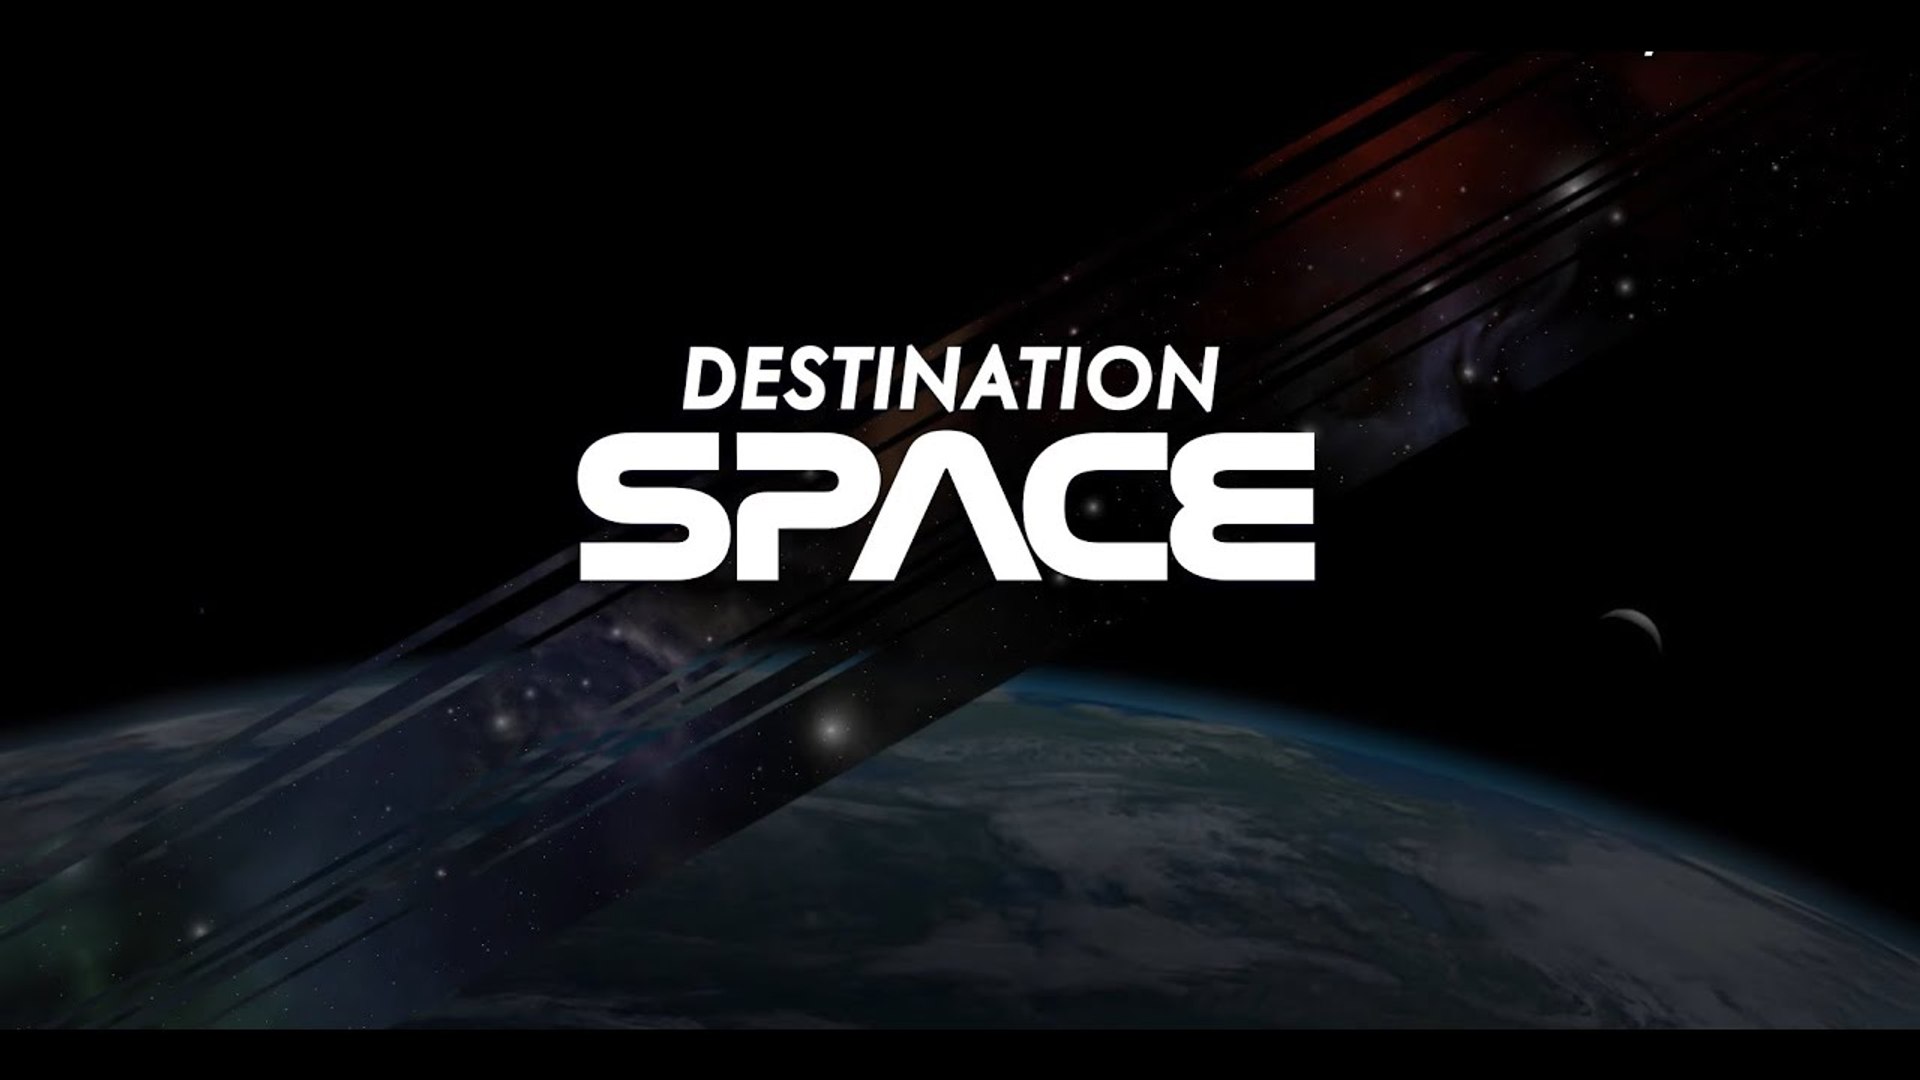 Destination Space- The first crewed SpaceX mission